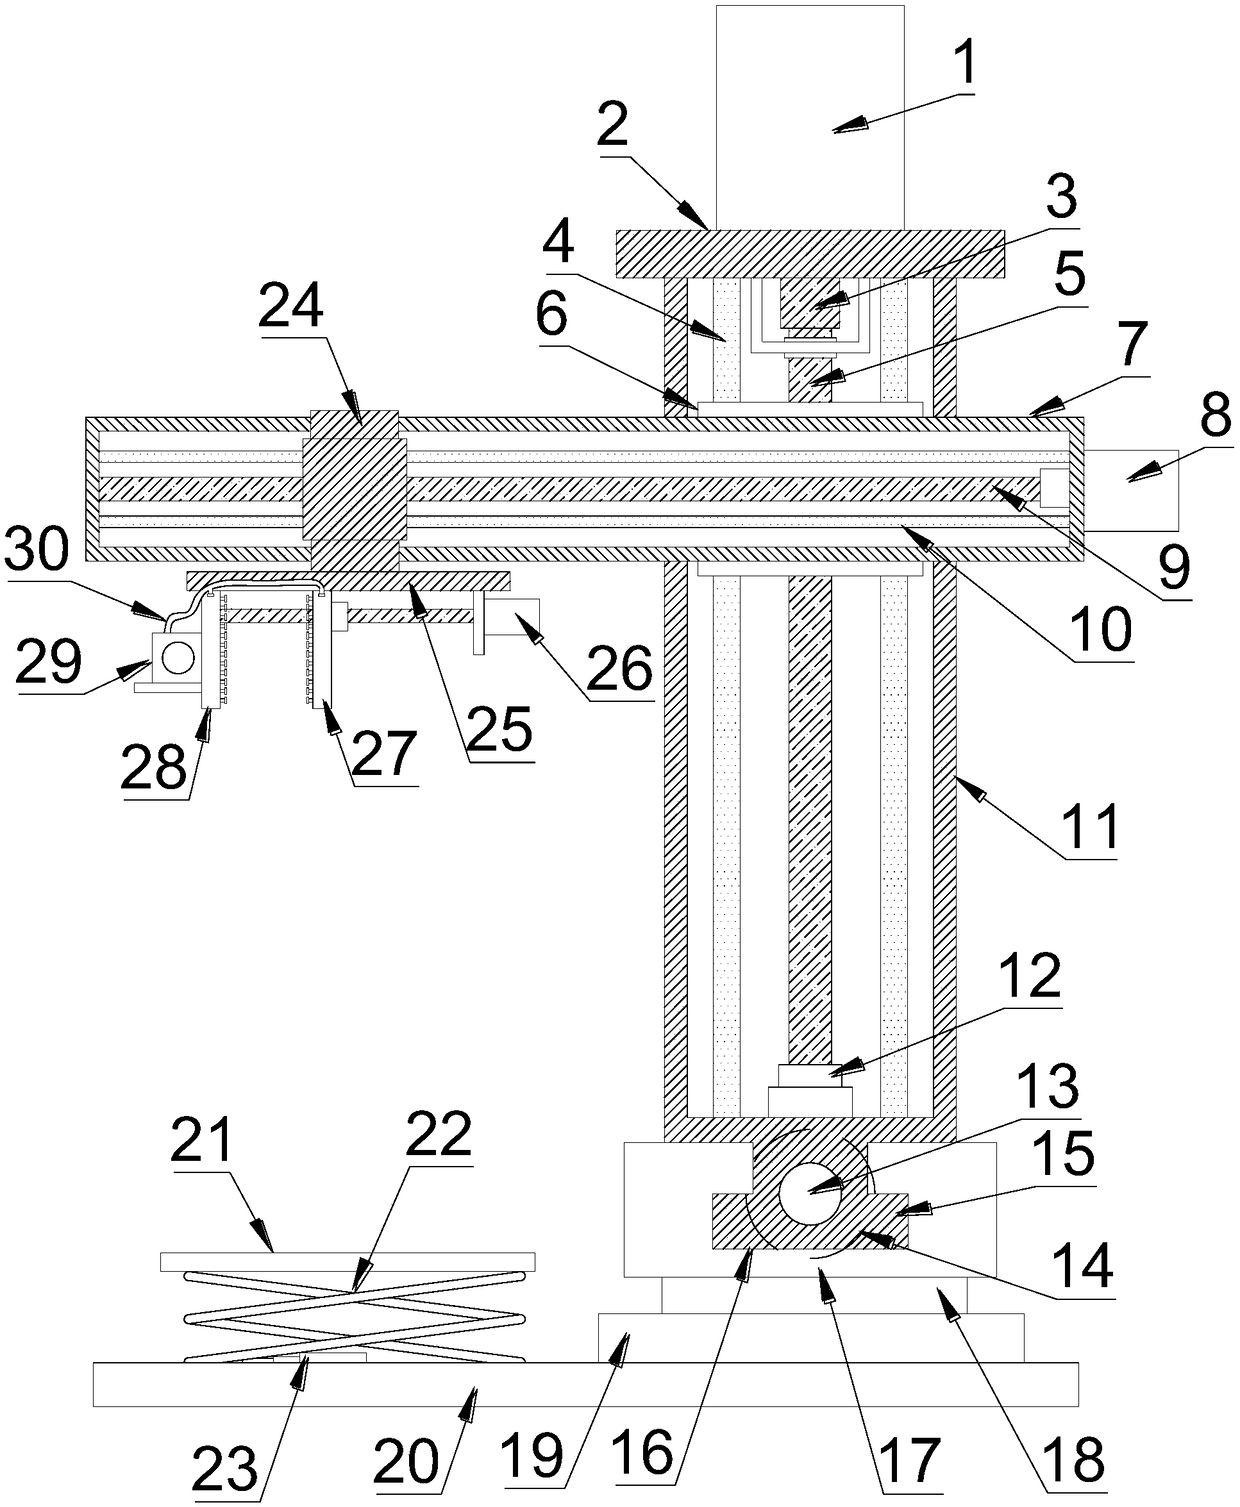 Stacking transferring mechanical device with flexible clamping gripper